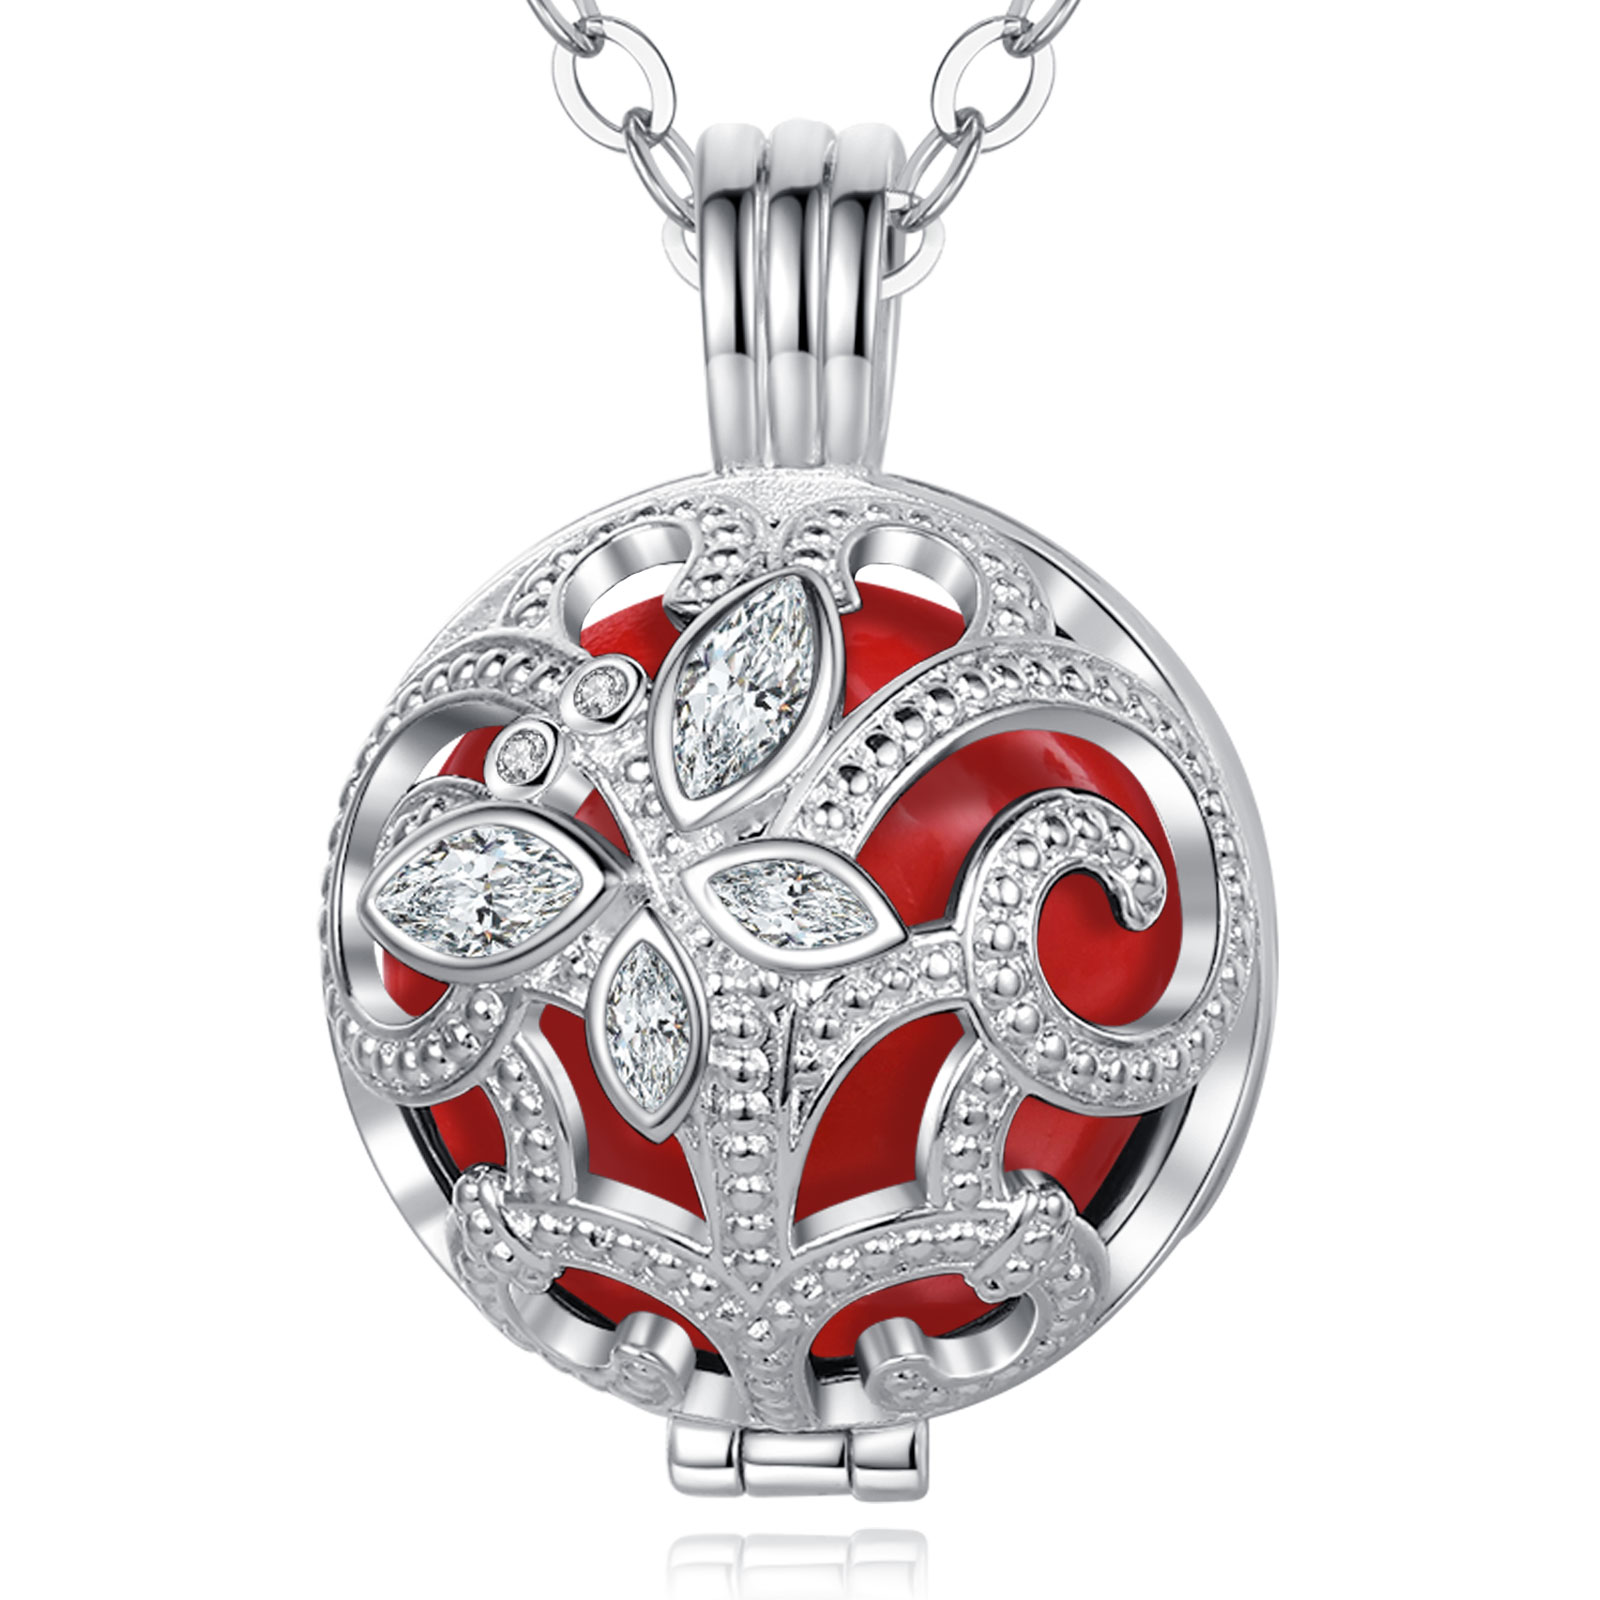 Silver Retro Butterfly Harmony Ball Locket Angel Chime Caller Bell Mexican Bola Balls Pendant Necklaces